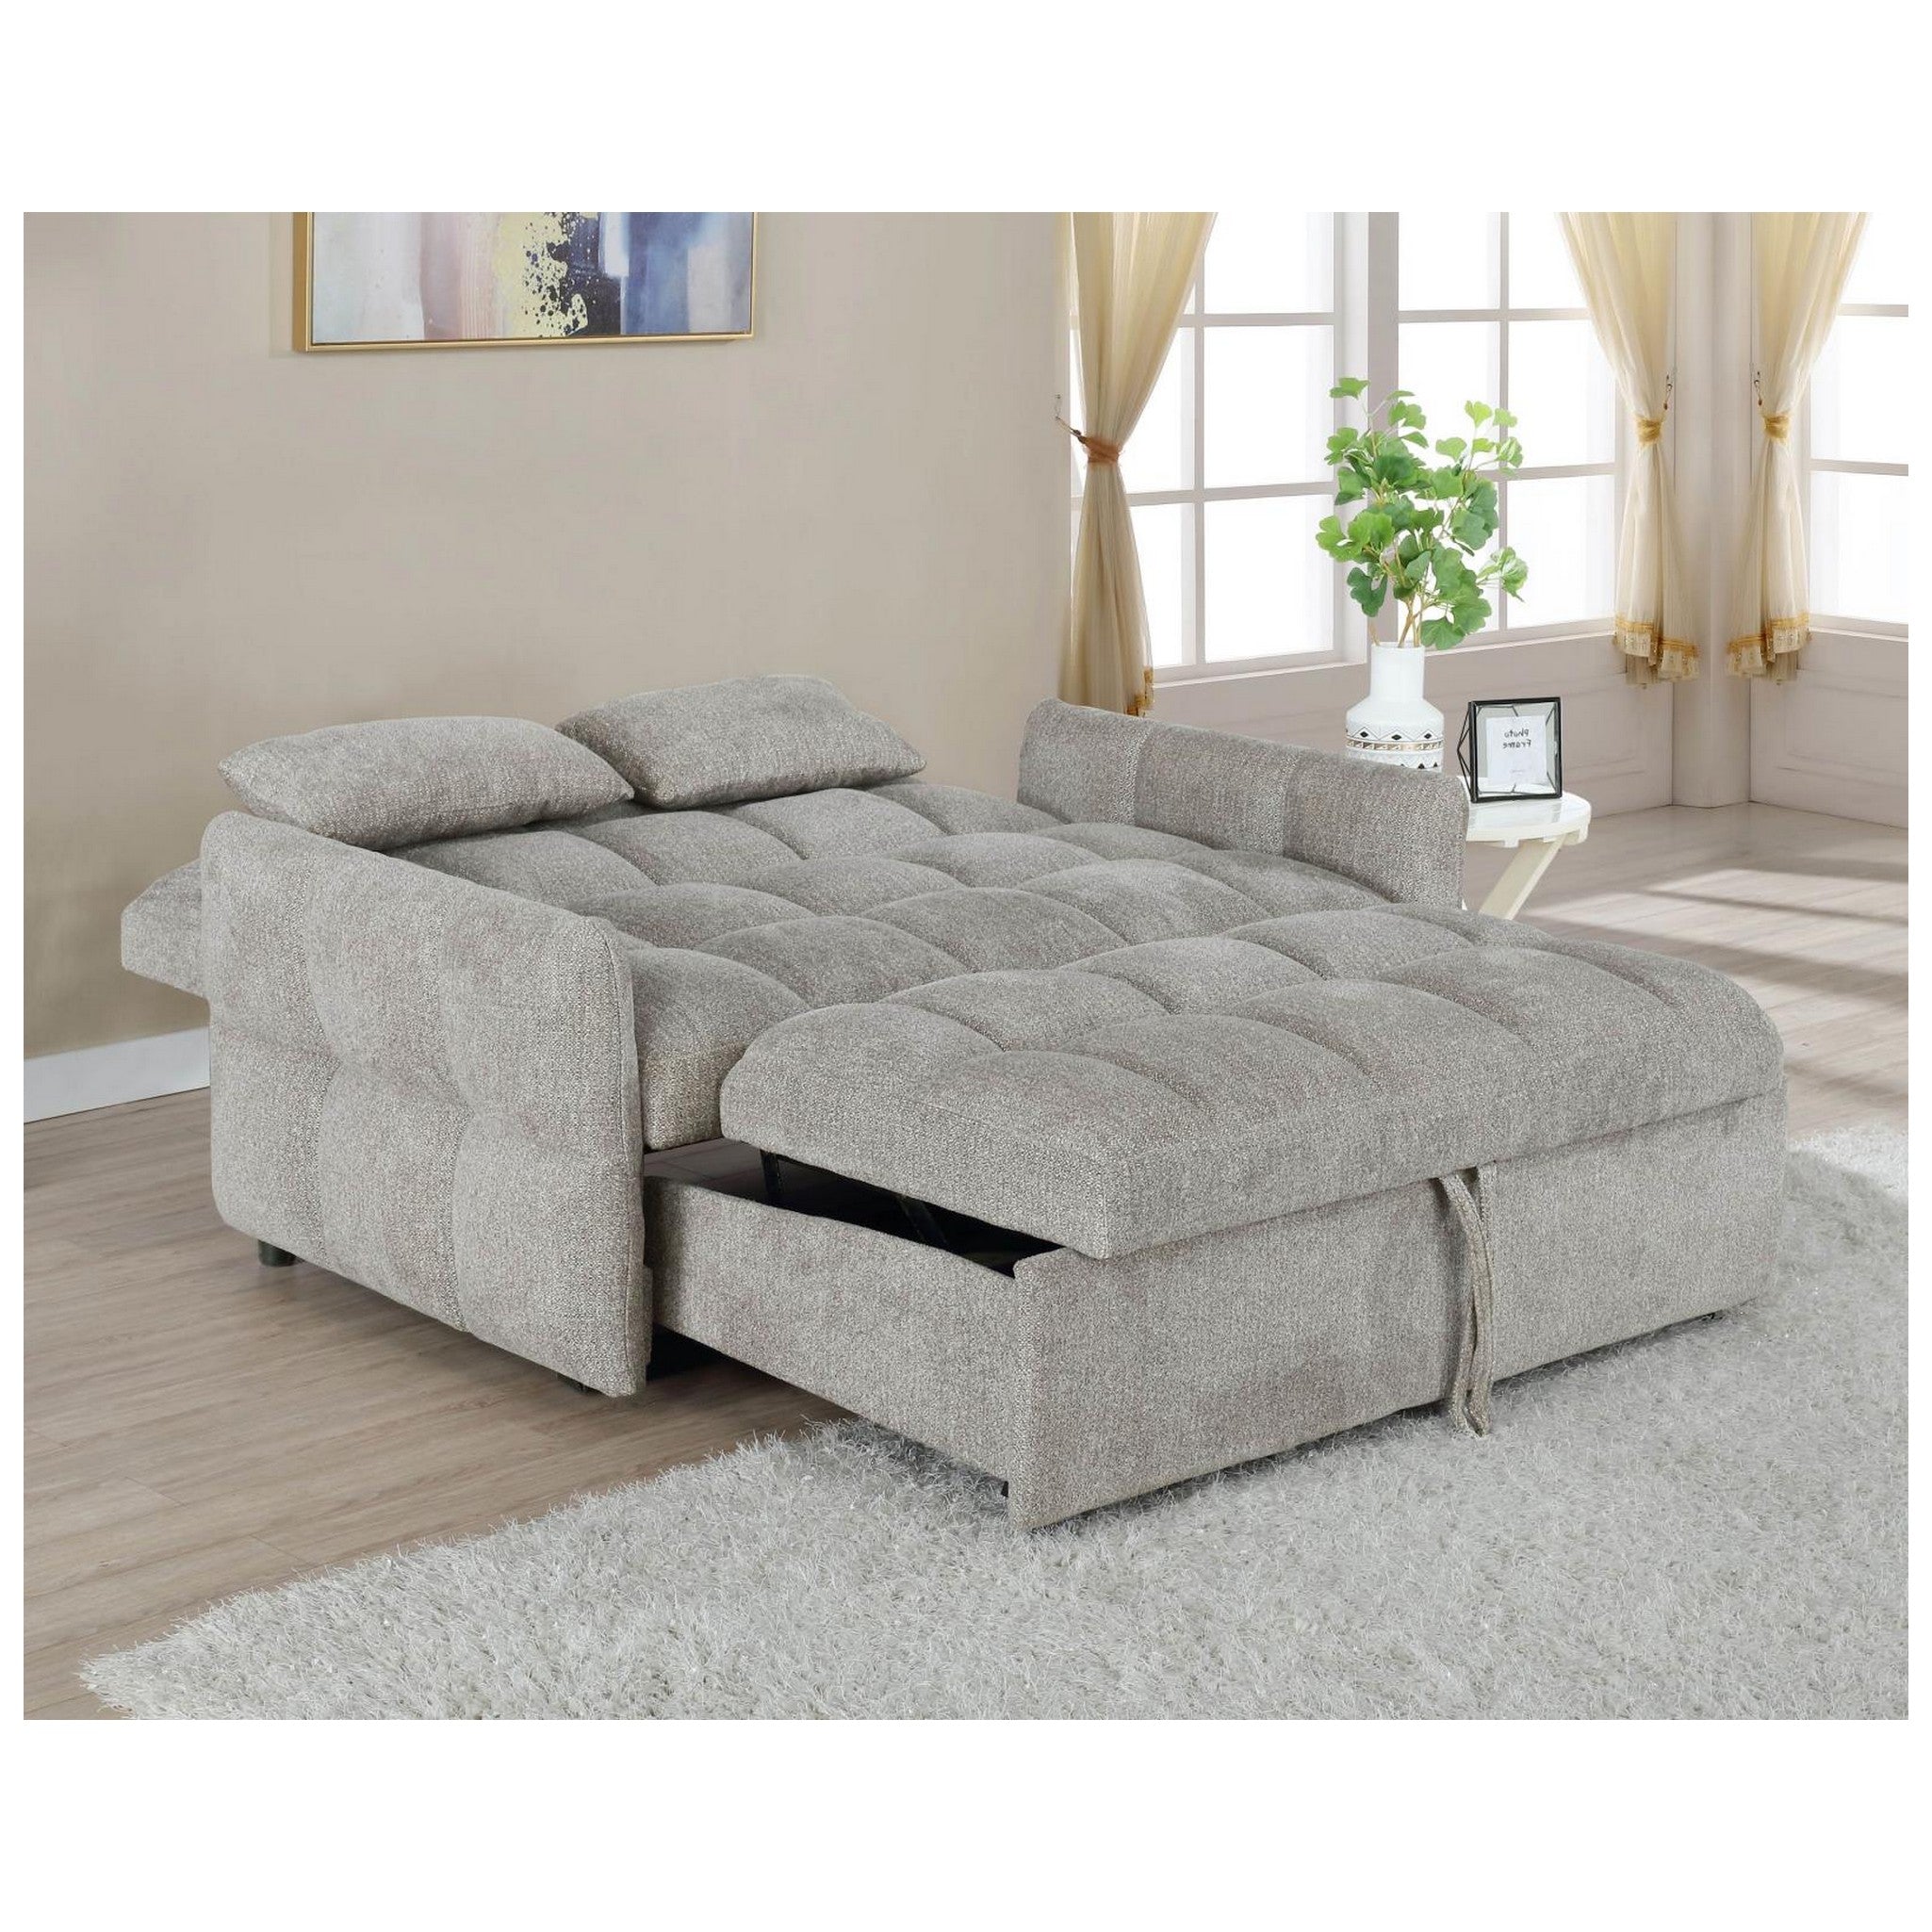 Cotswold Tufted Cushion Sleeper Sofa Bed Beige 508307